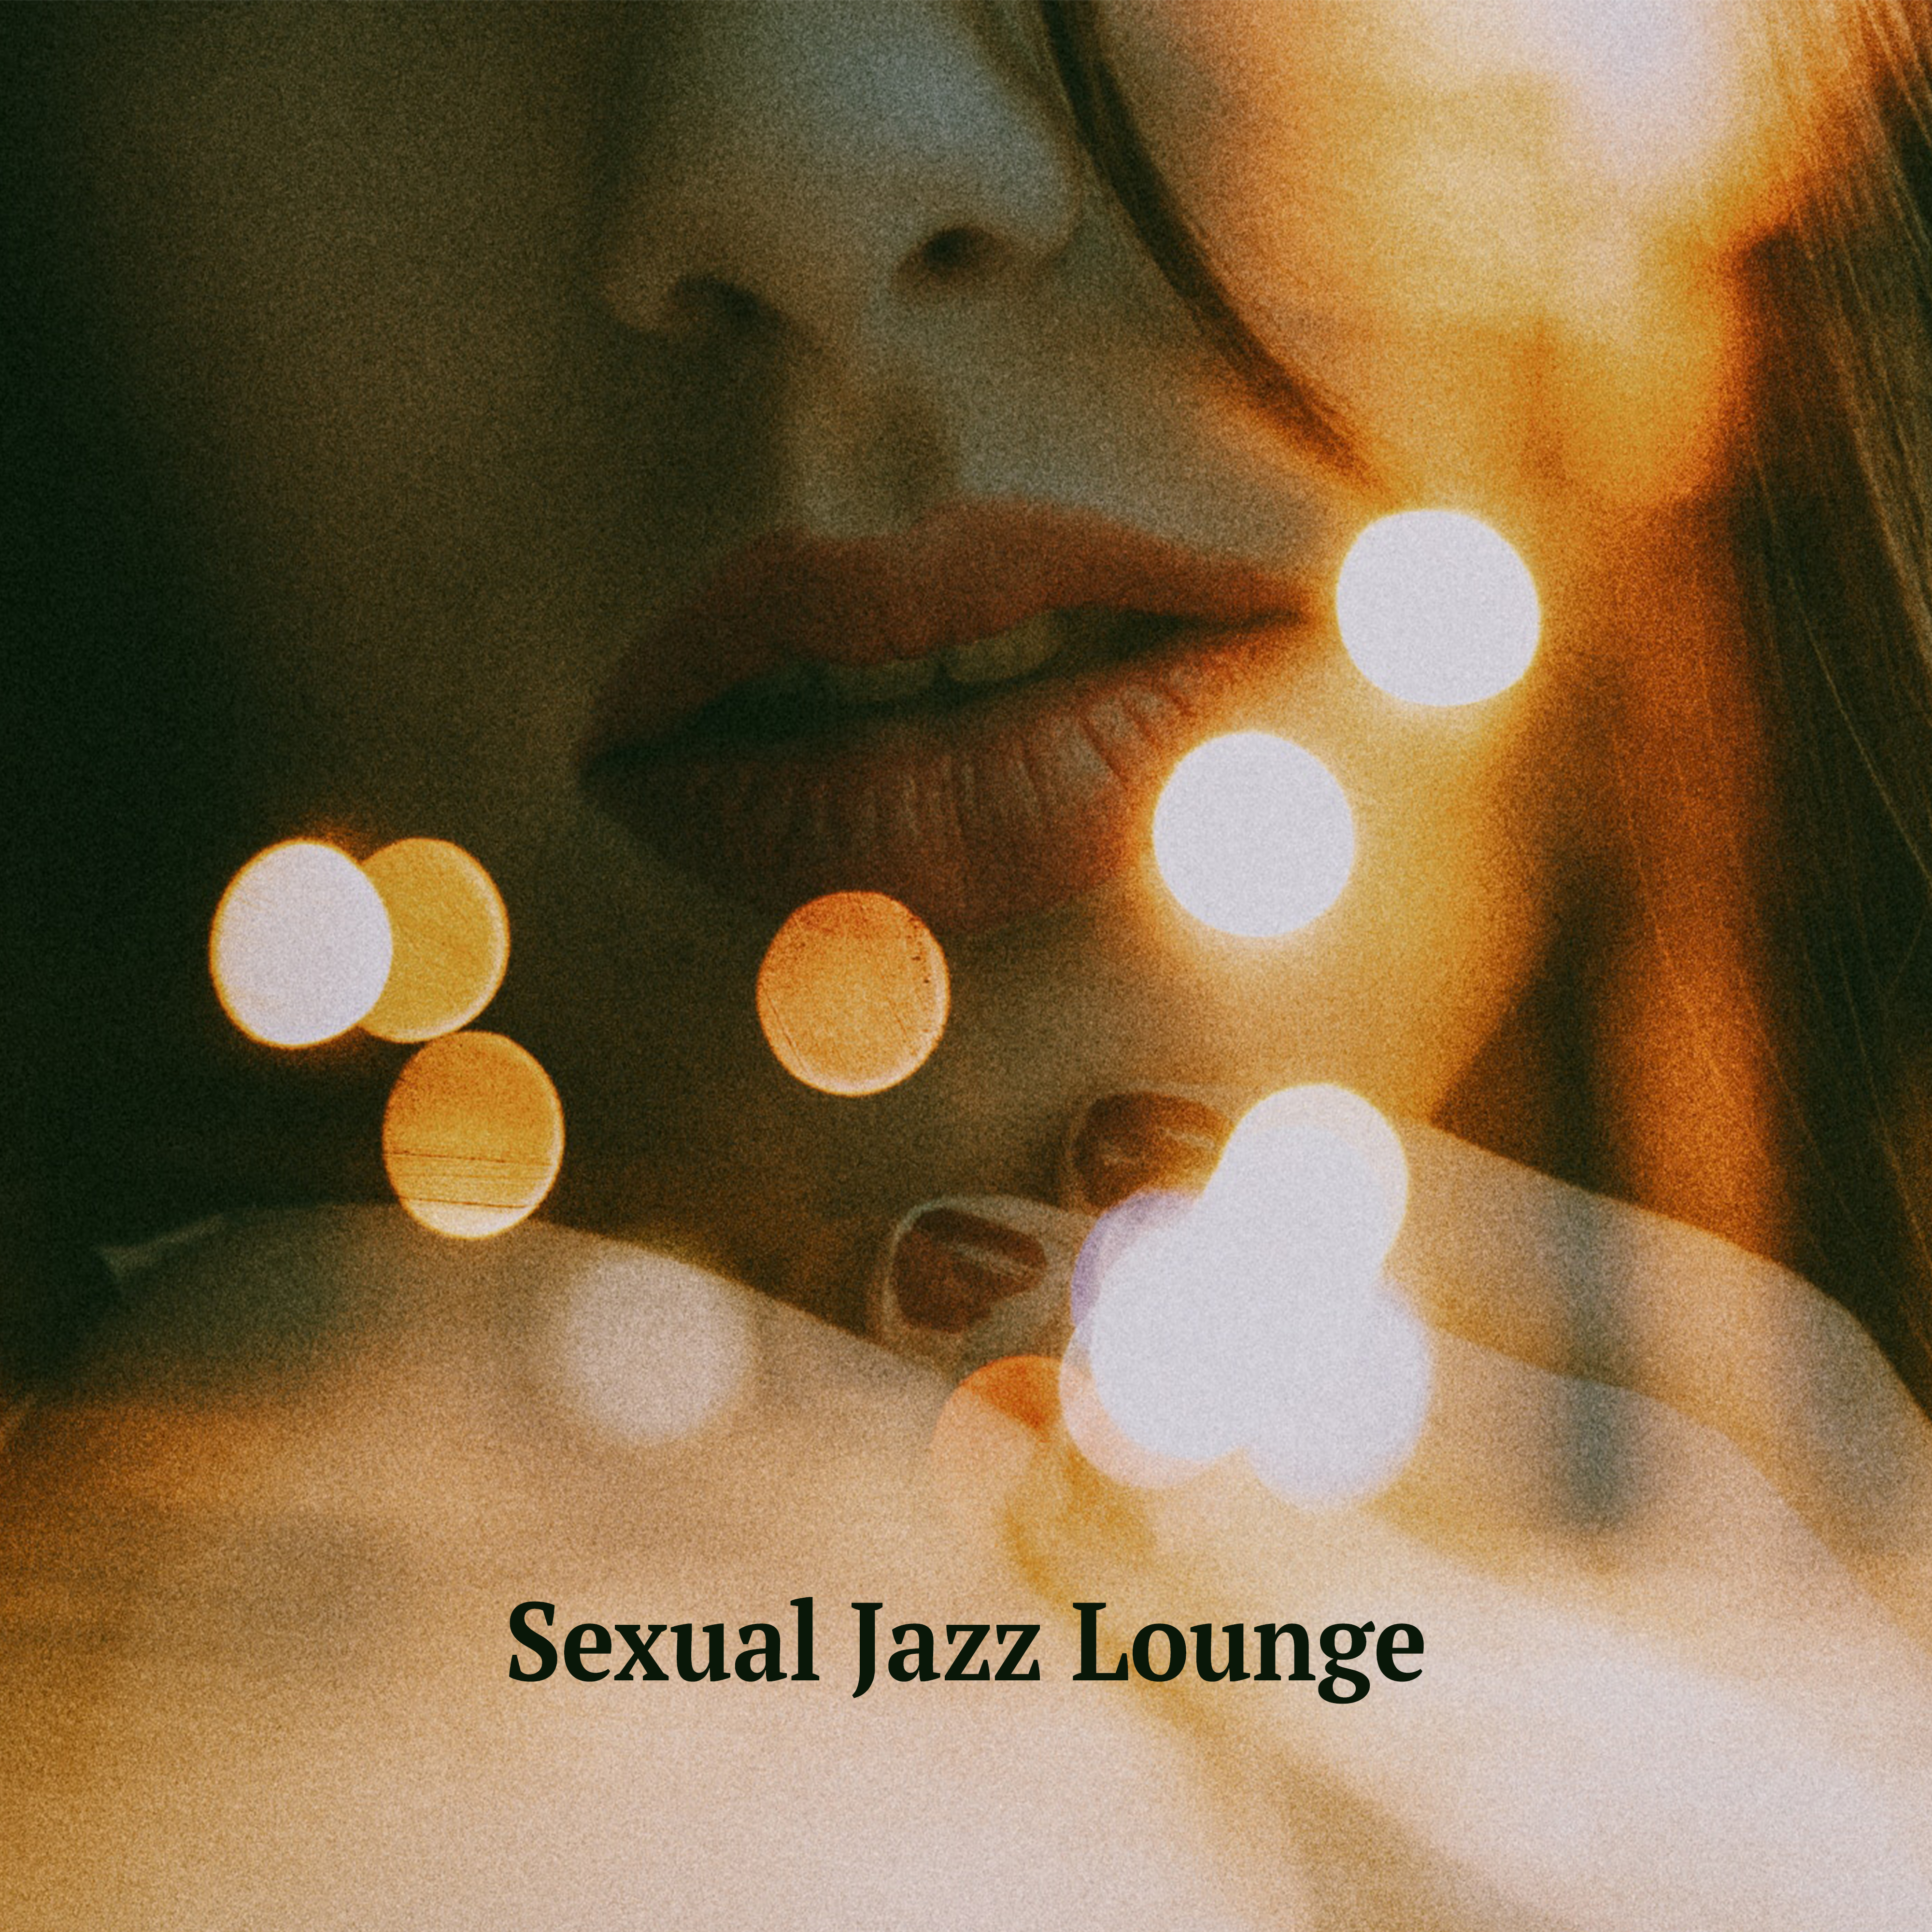 Jazz Lounge  Erotic Lounge, Jazz for Lovers, Romantic Background Music, Sounds to Relax